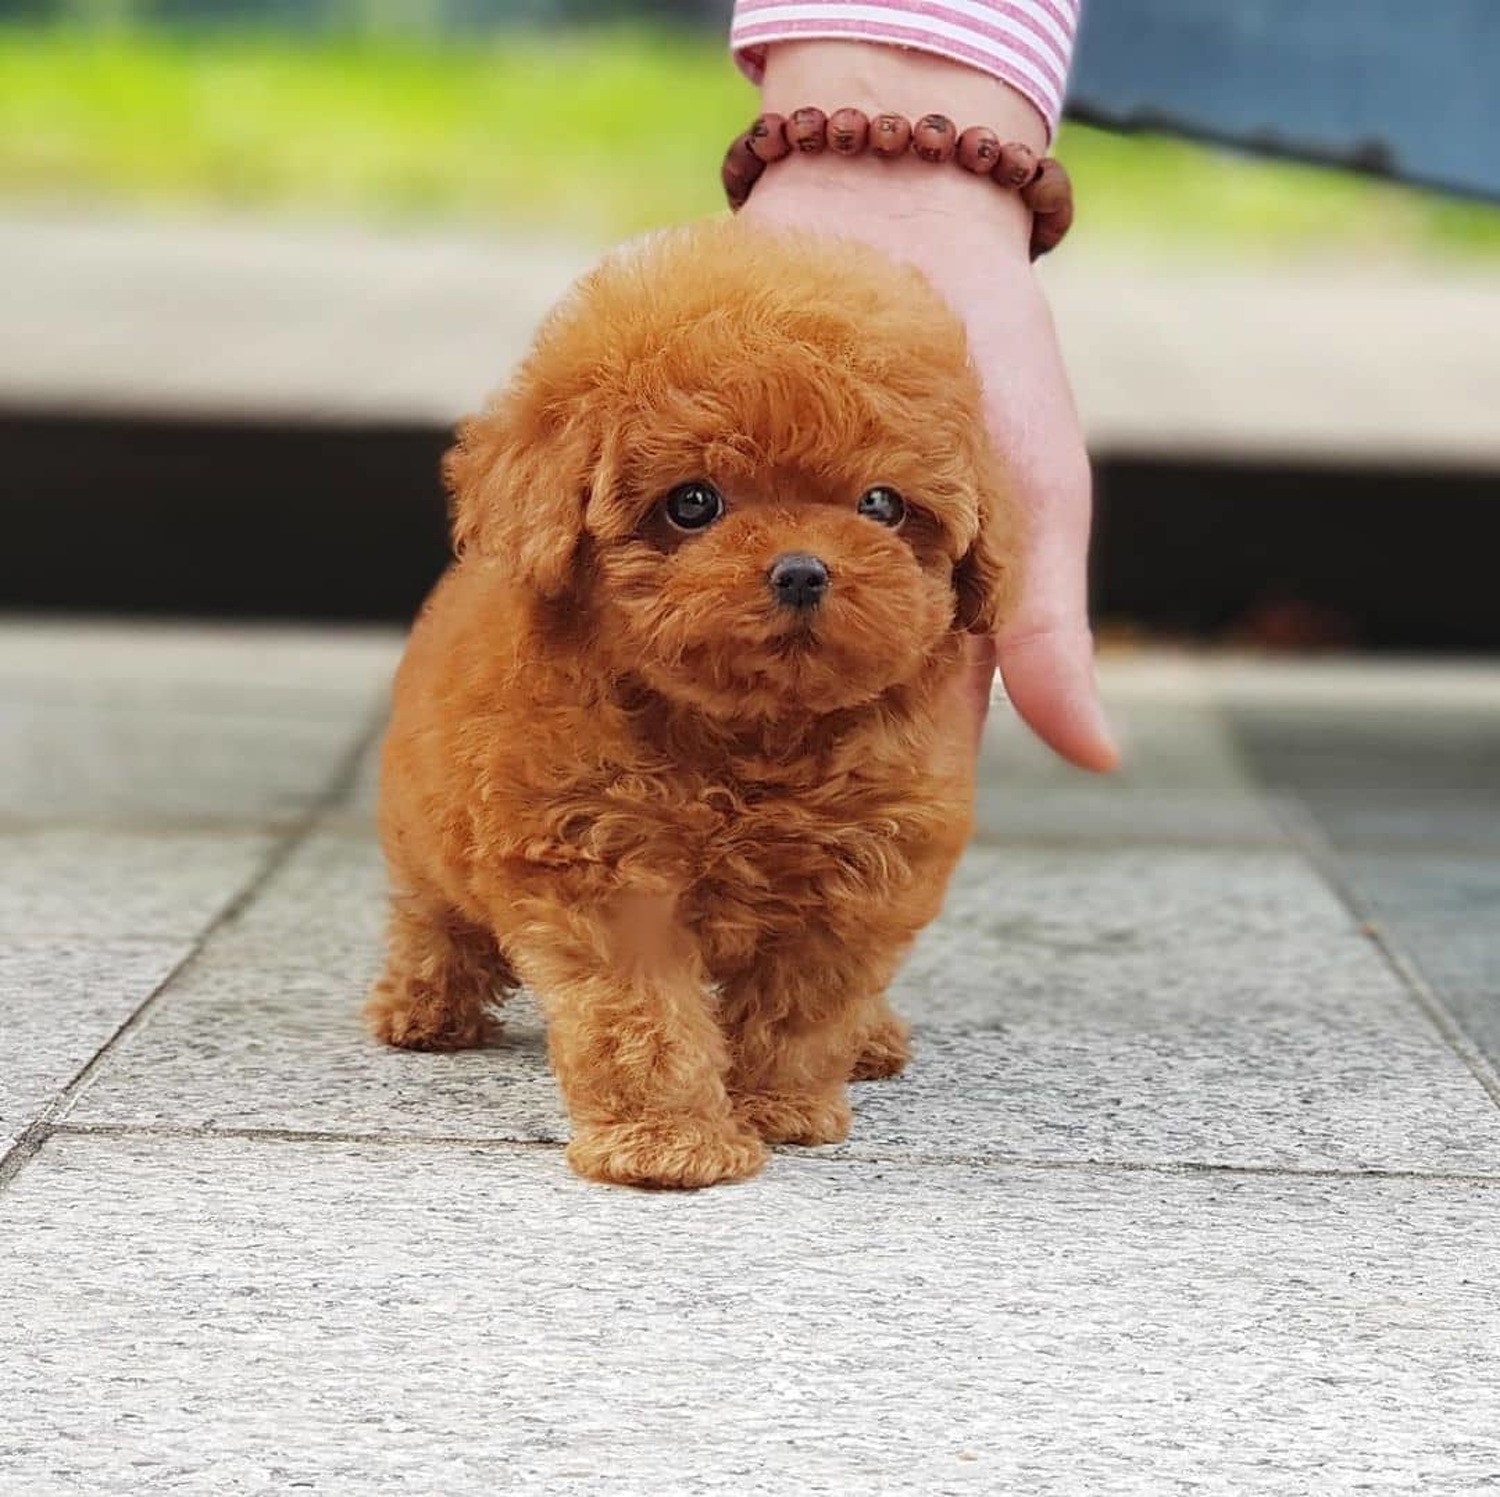 Poodle, AKC Toy/Teacup Poodle Puppies, Dogs, for Sale, Price